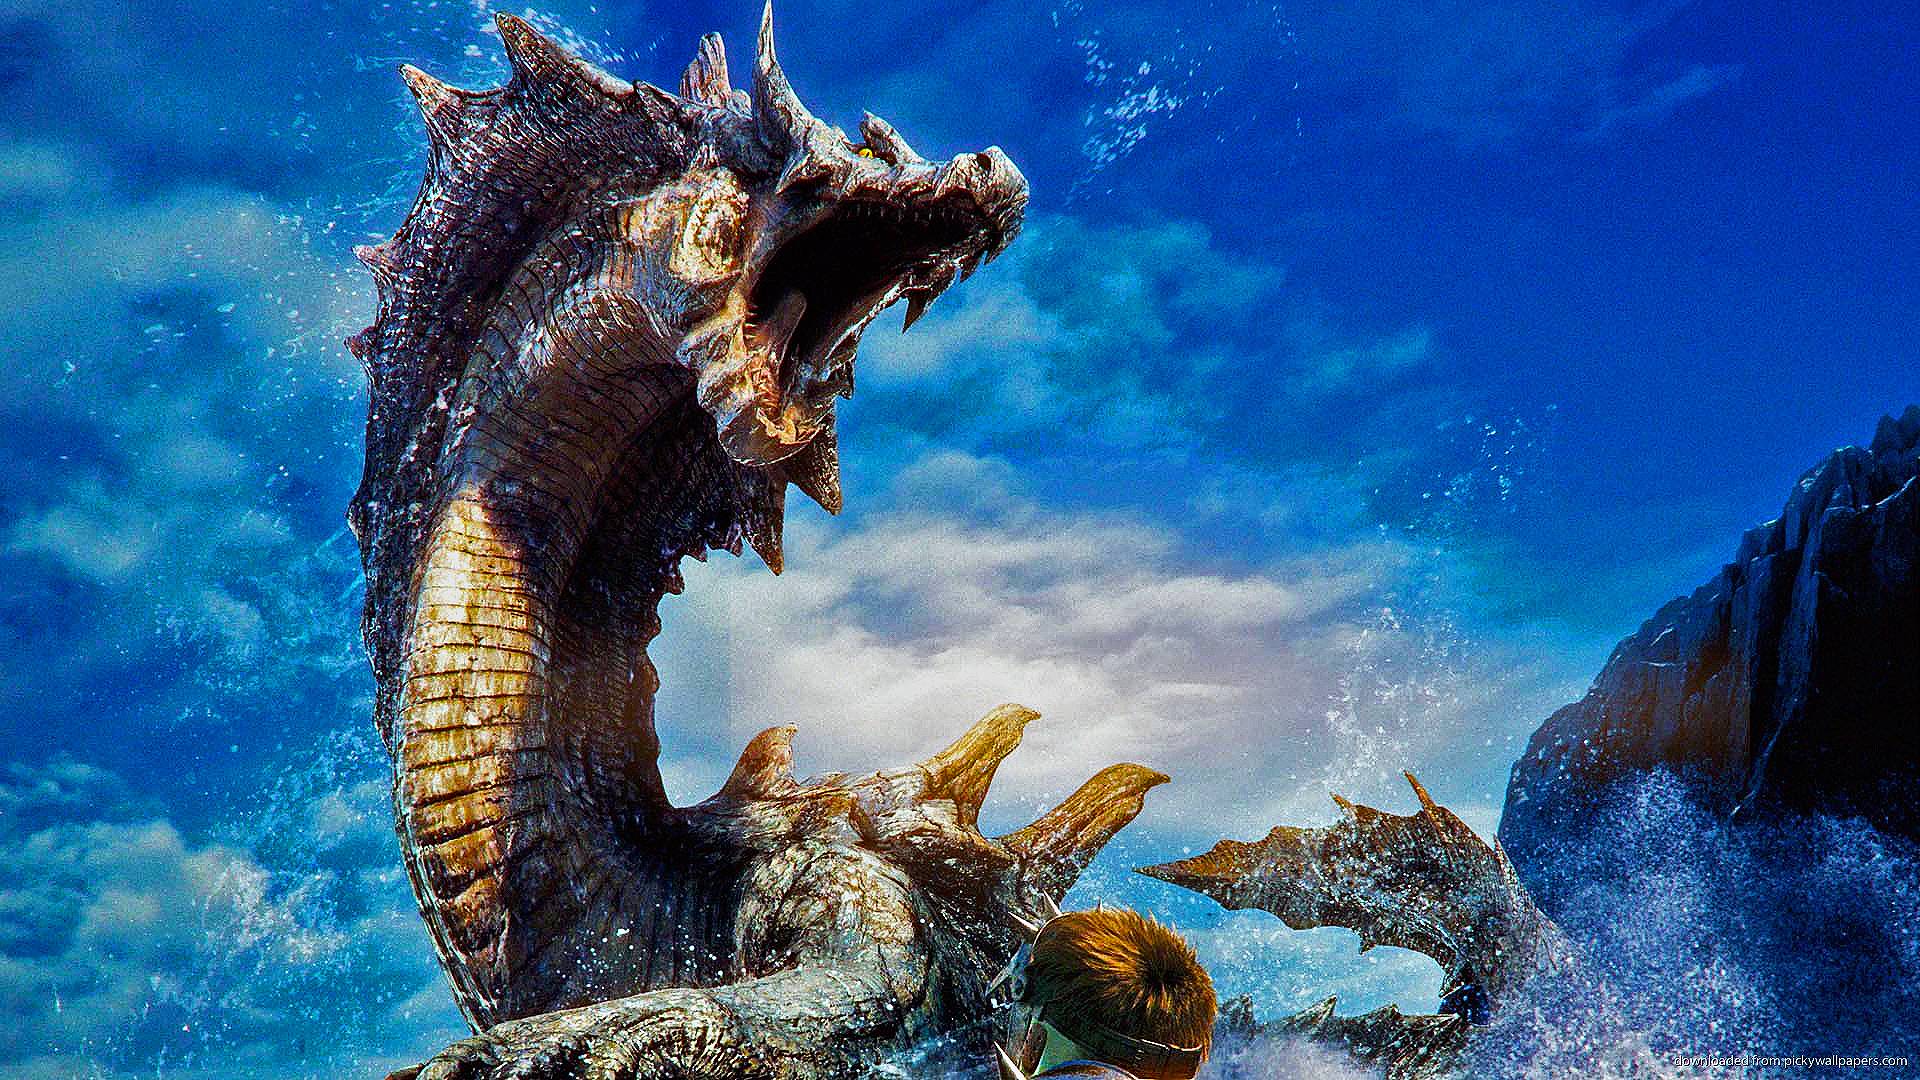 Capcom Wants Monster Hunter Growth in The West